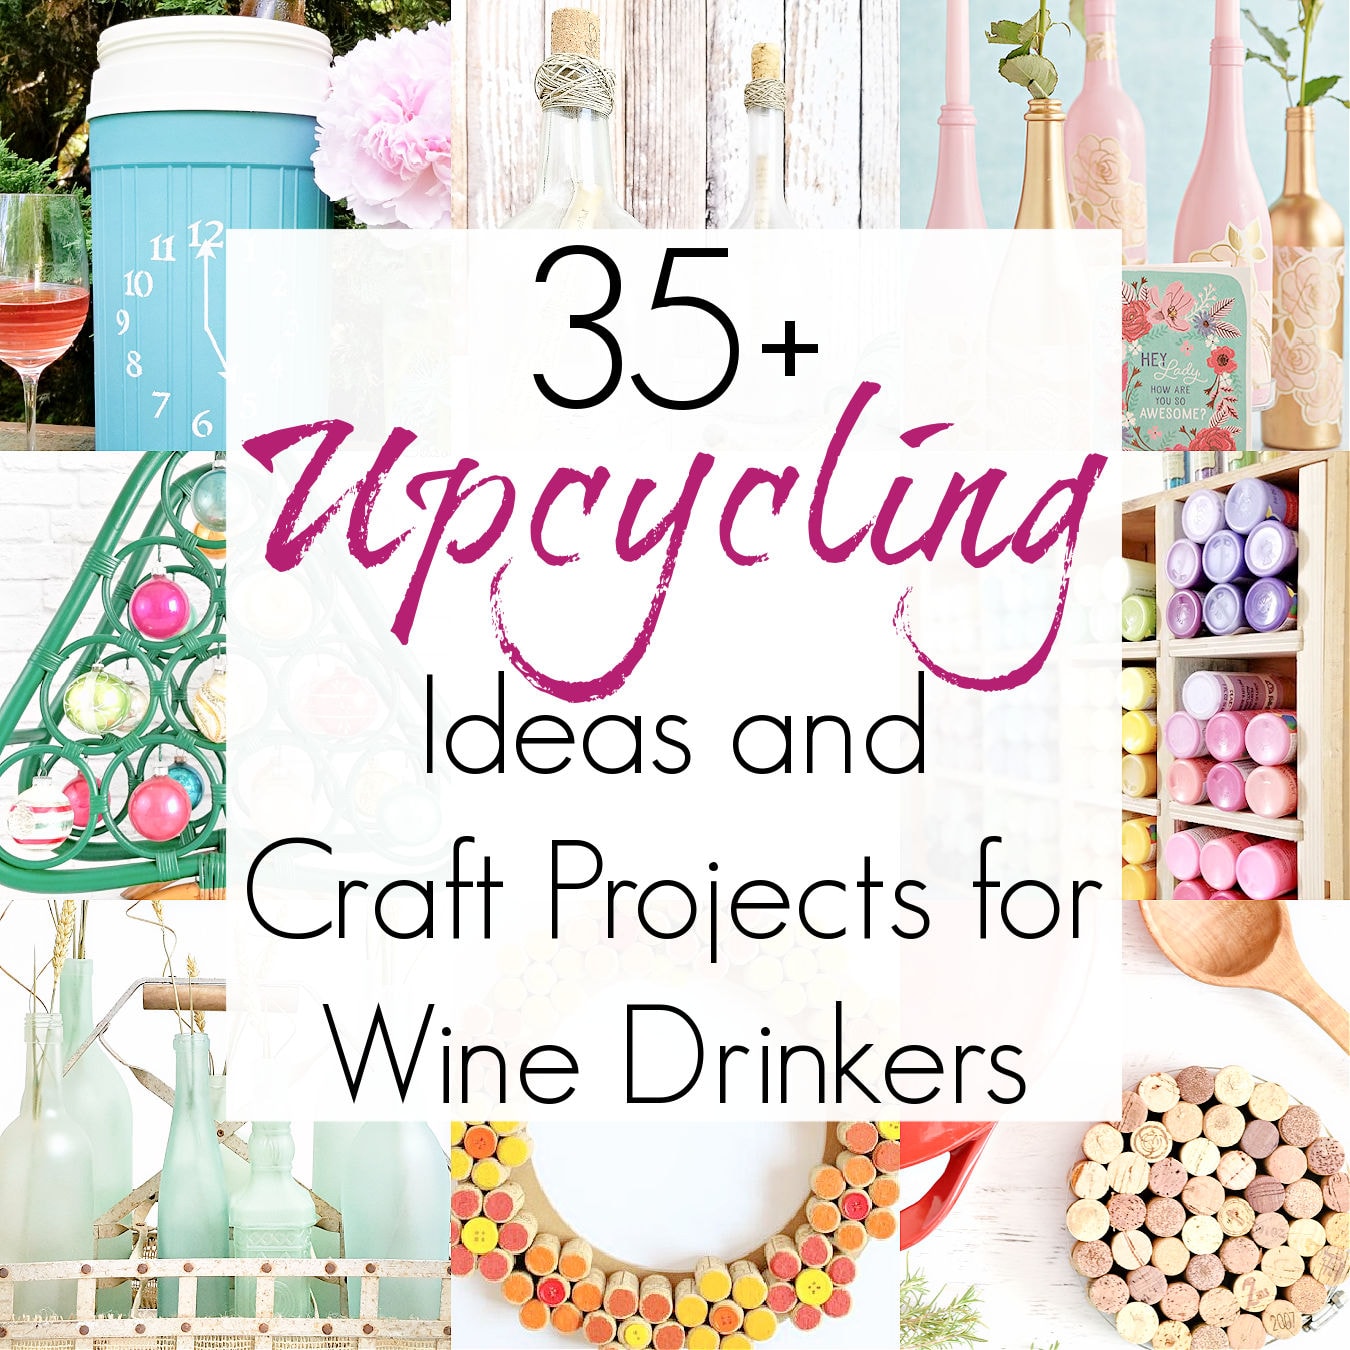 wine crafts and recycling project ideas